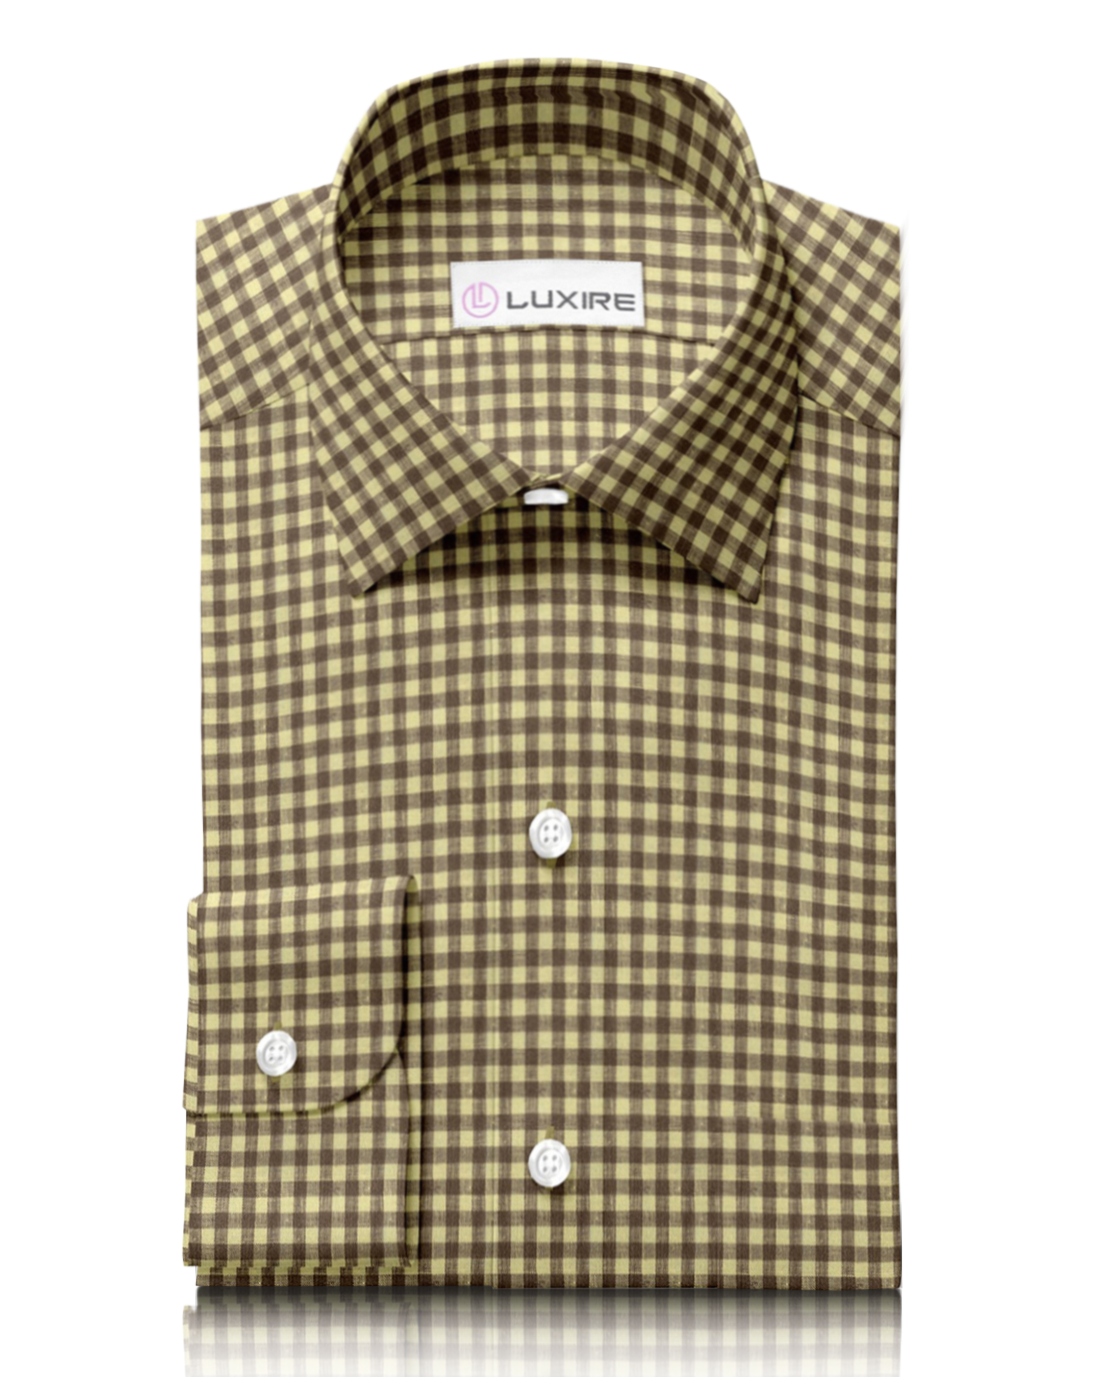 Front of custom linen shirt for men in yellow and brown by Luxire Clothing